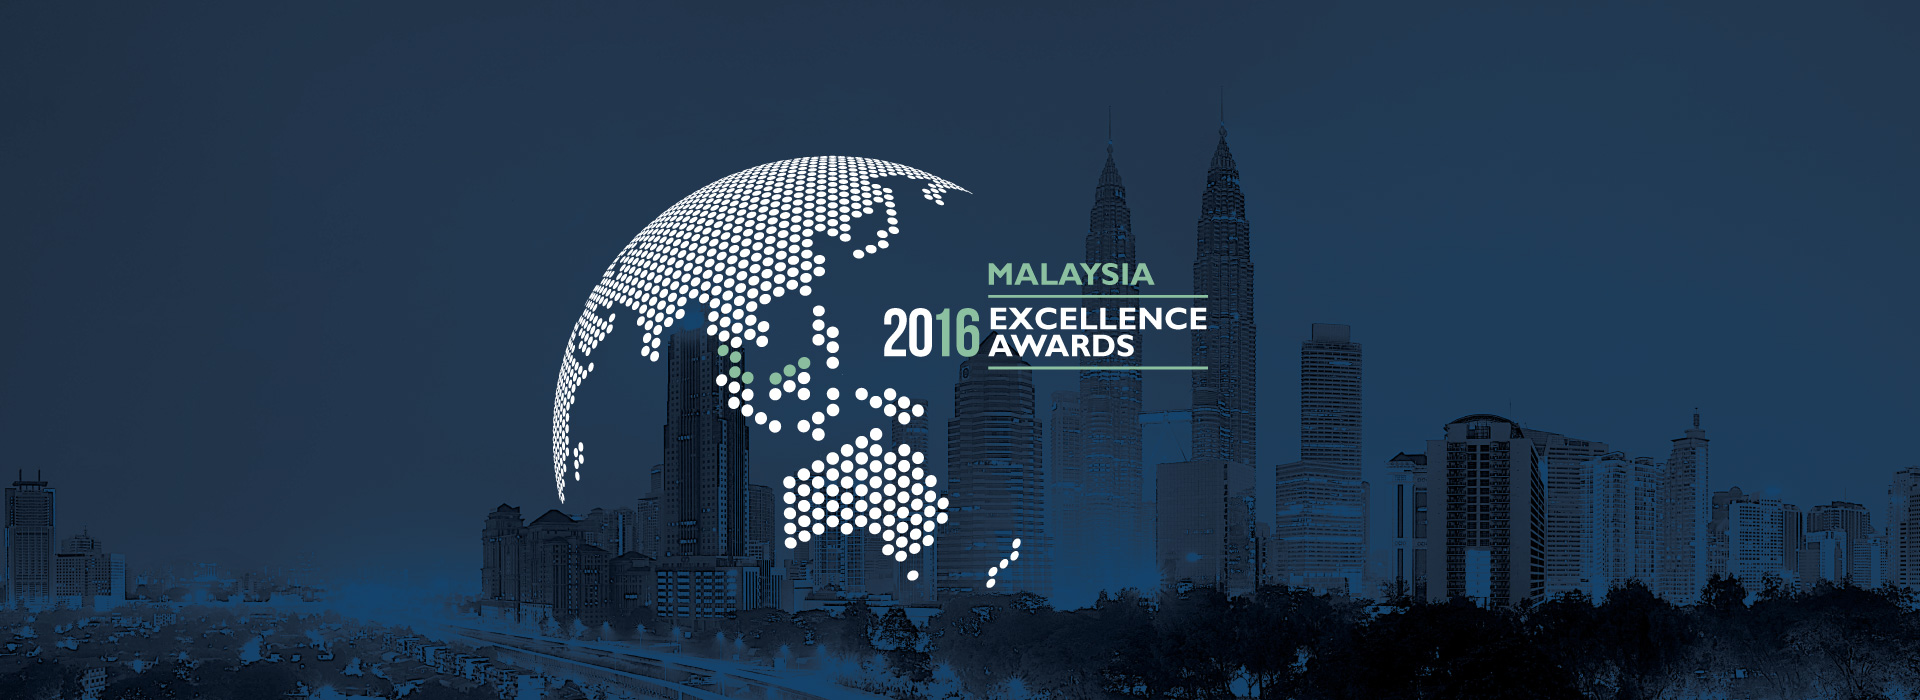 Frost & Sullivan Malaysia Excellence Award